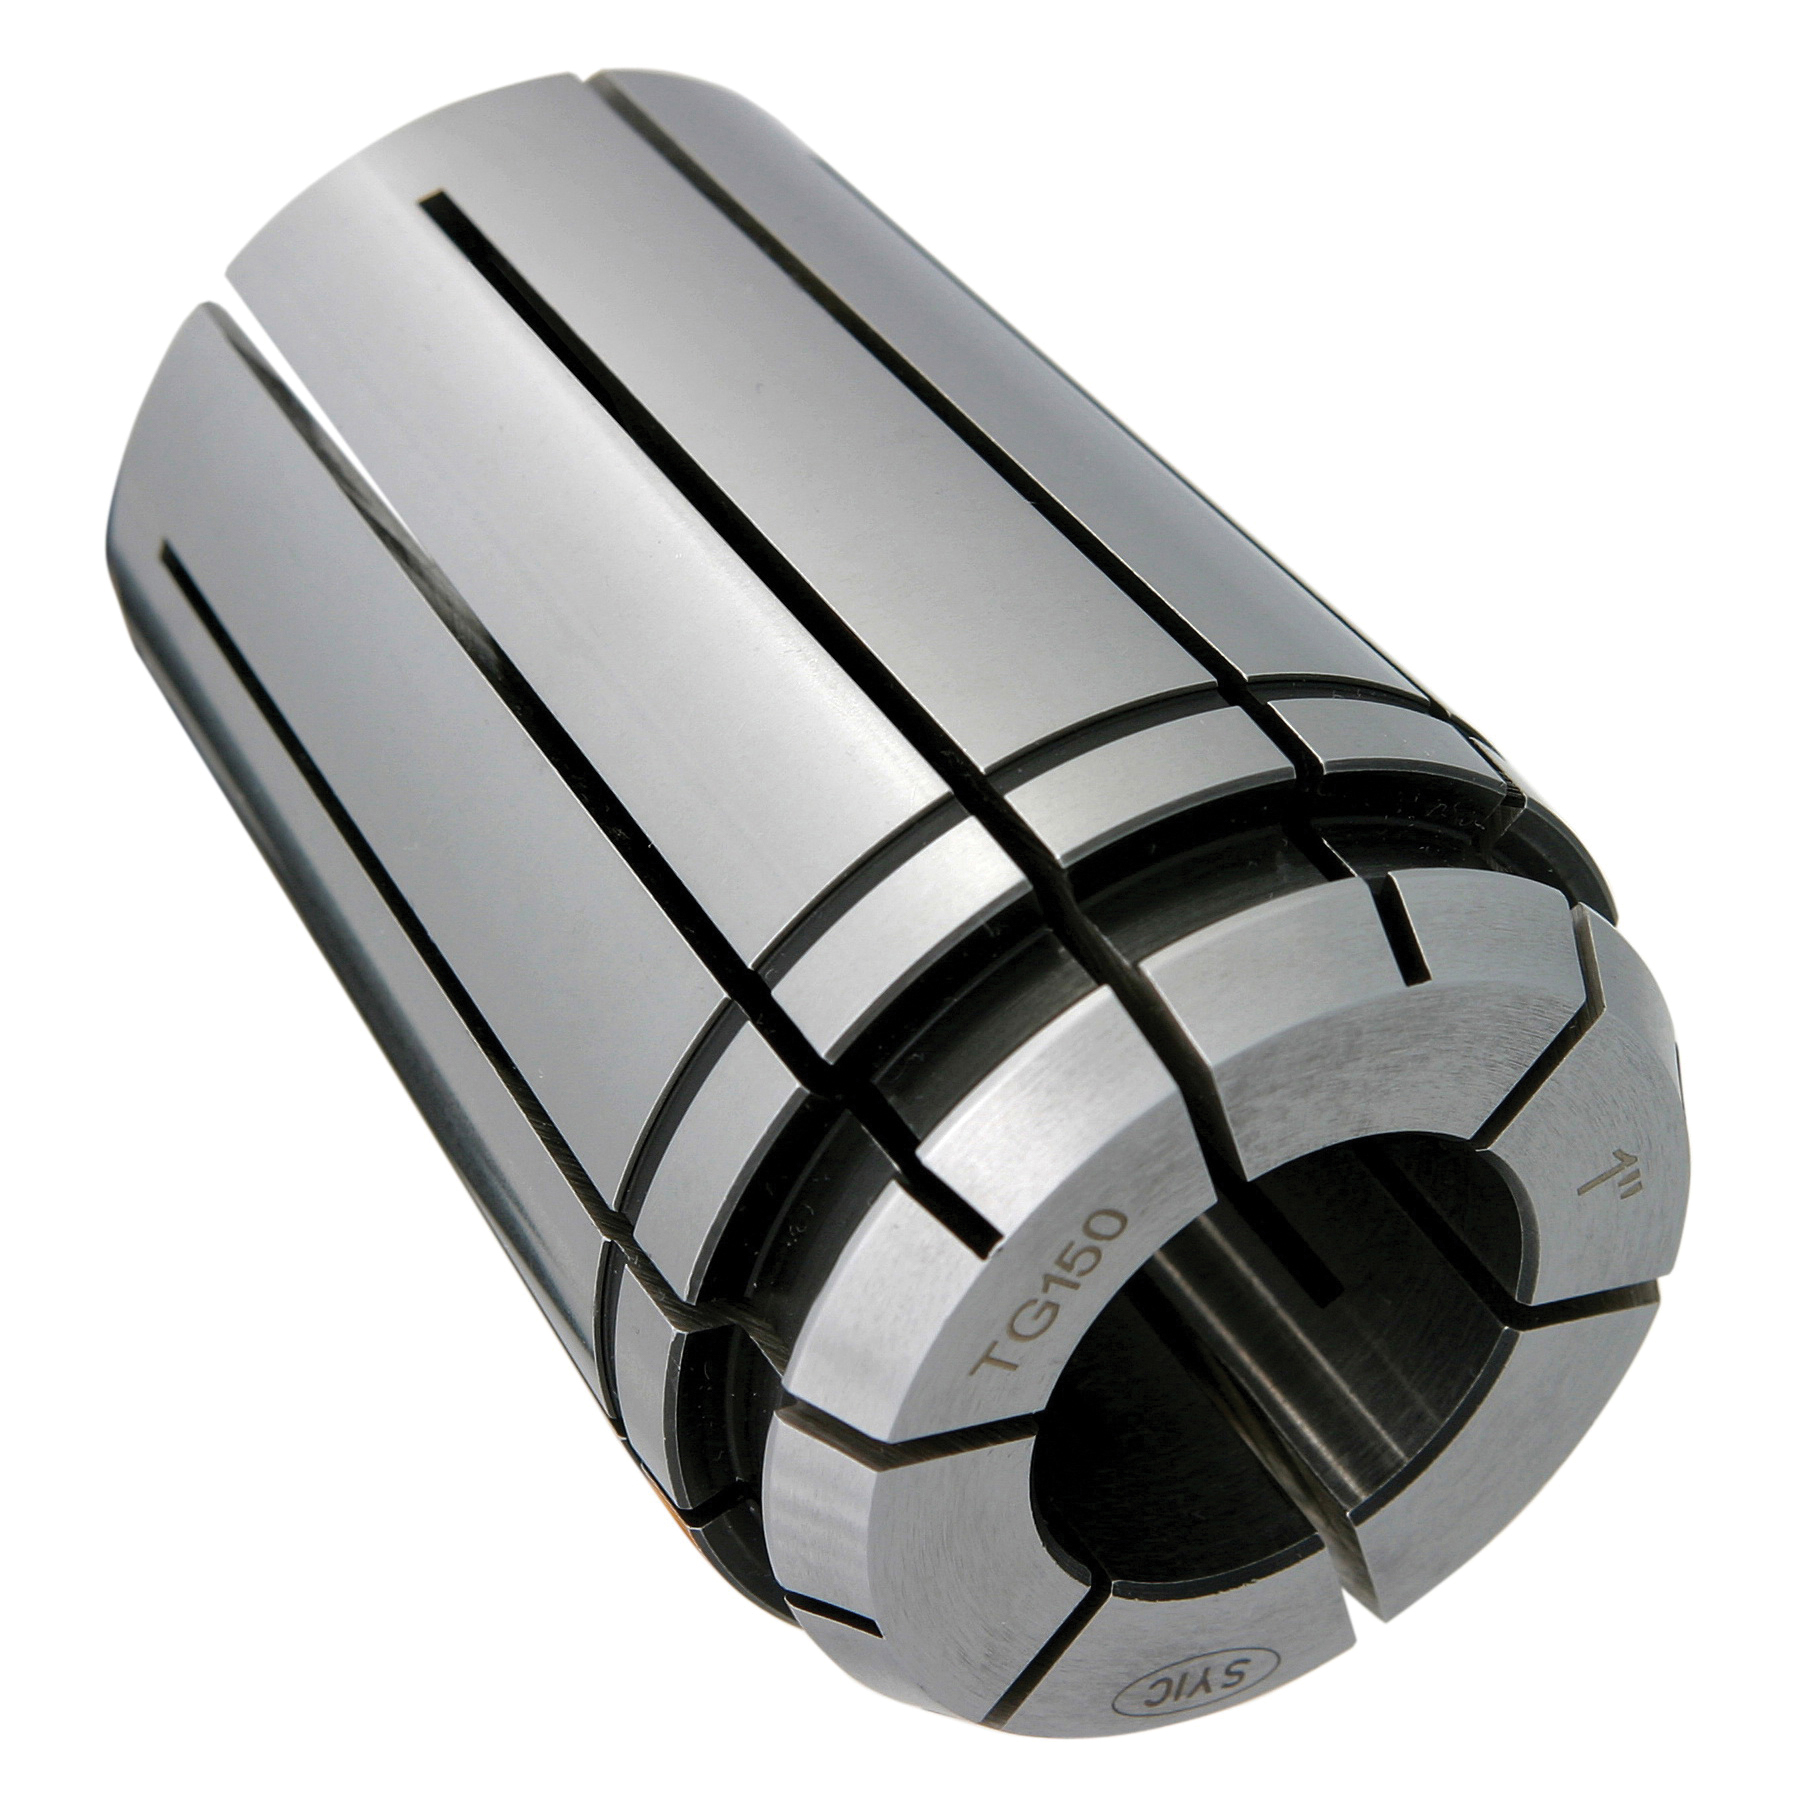 TG150 9/16" COLLET